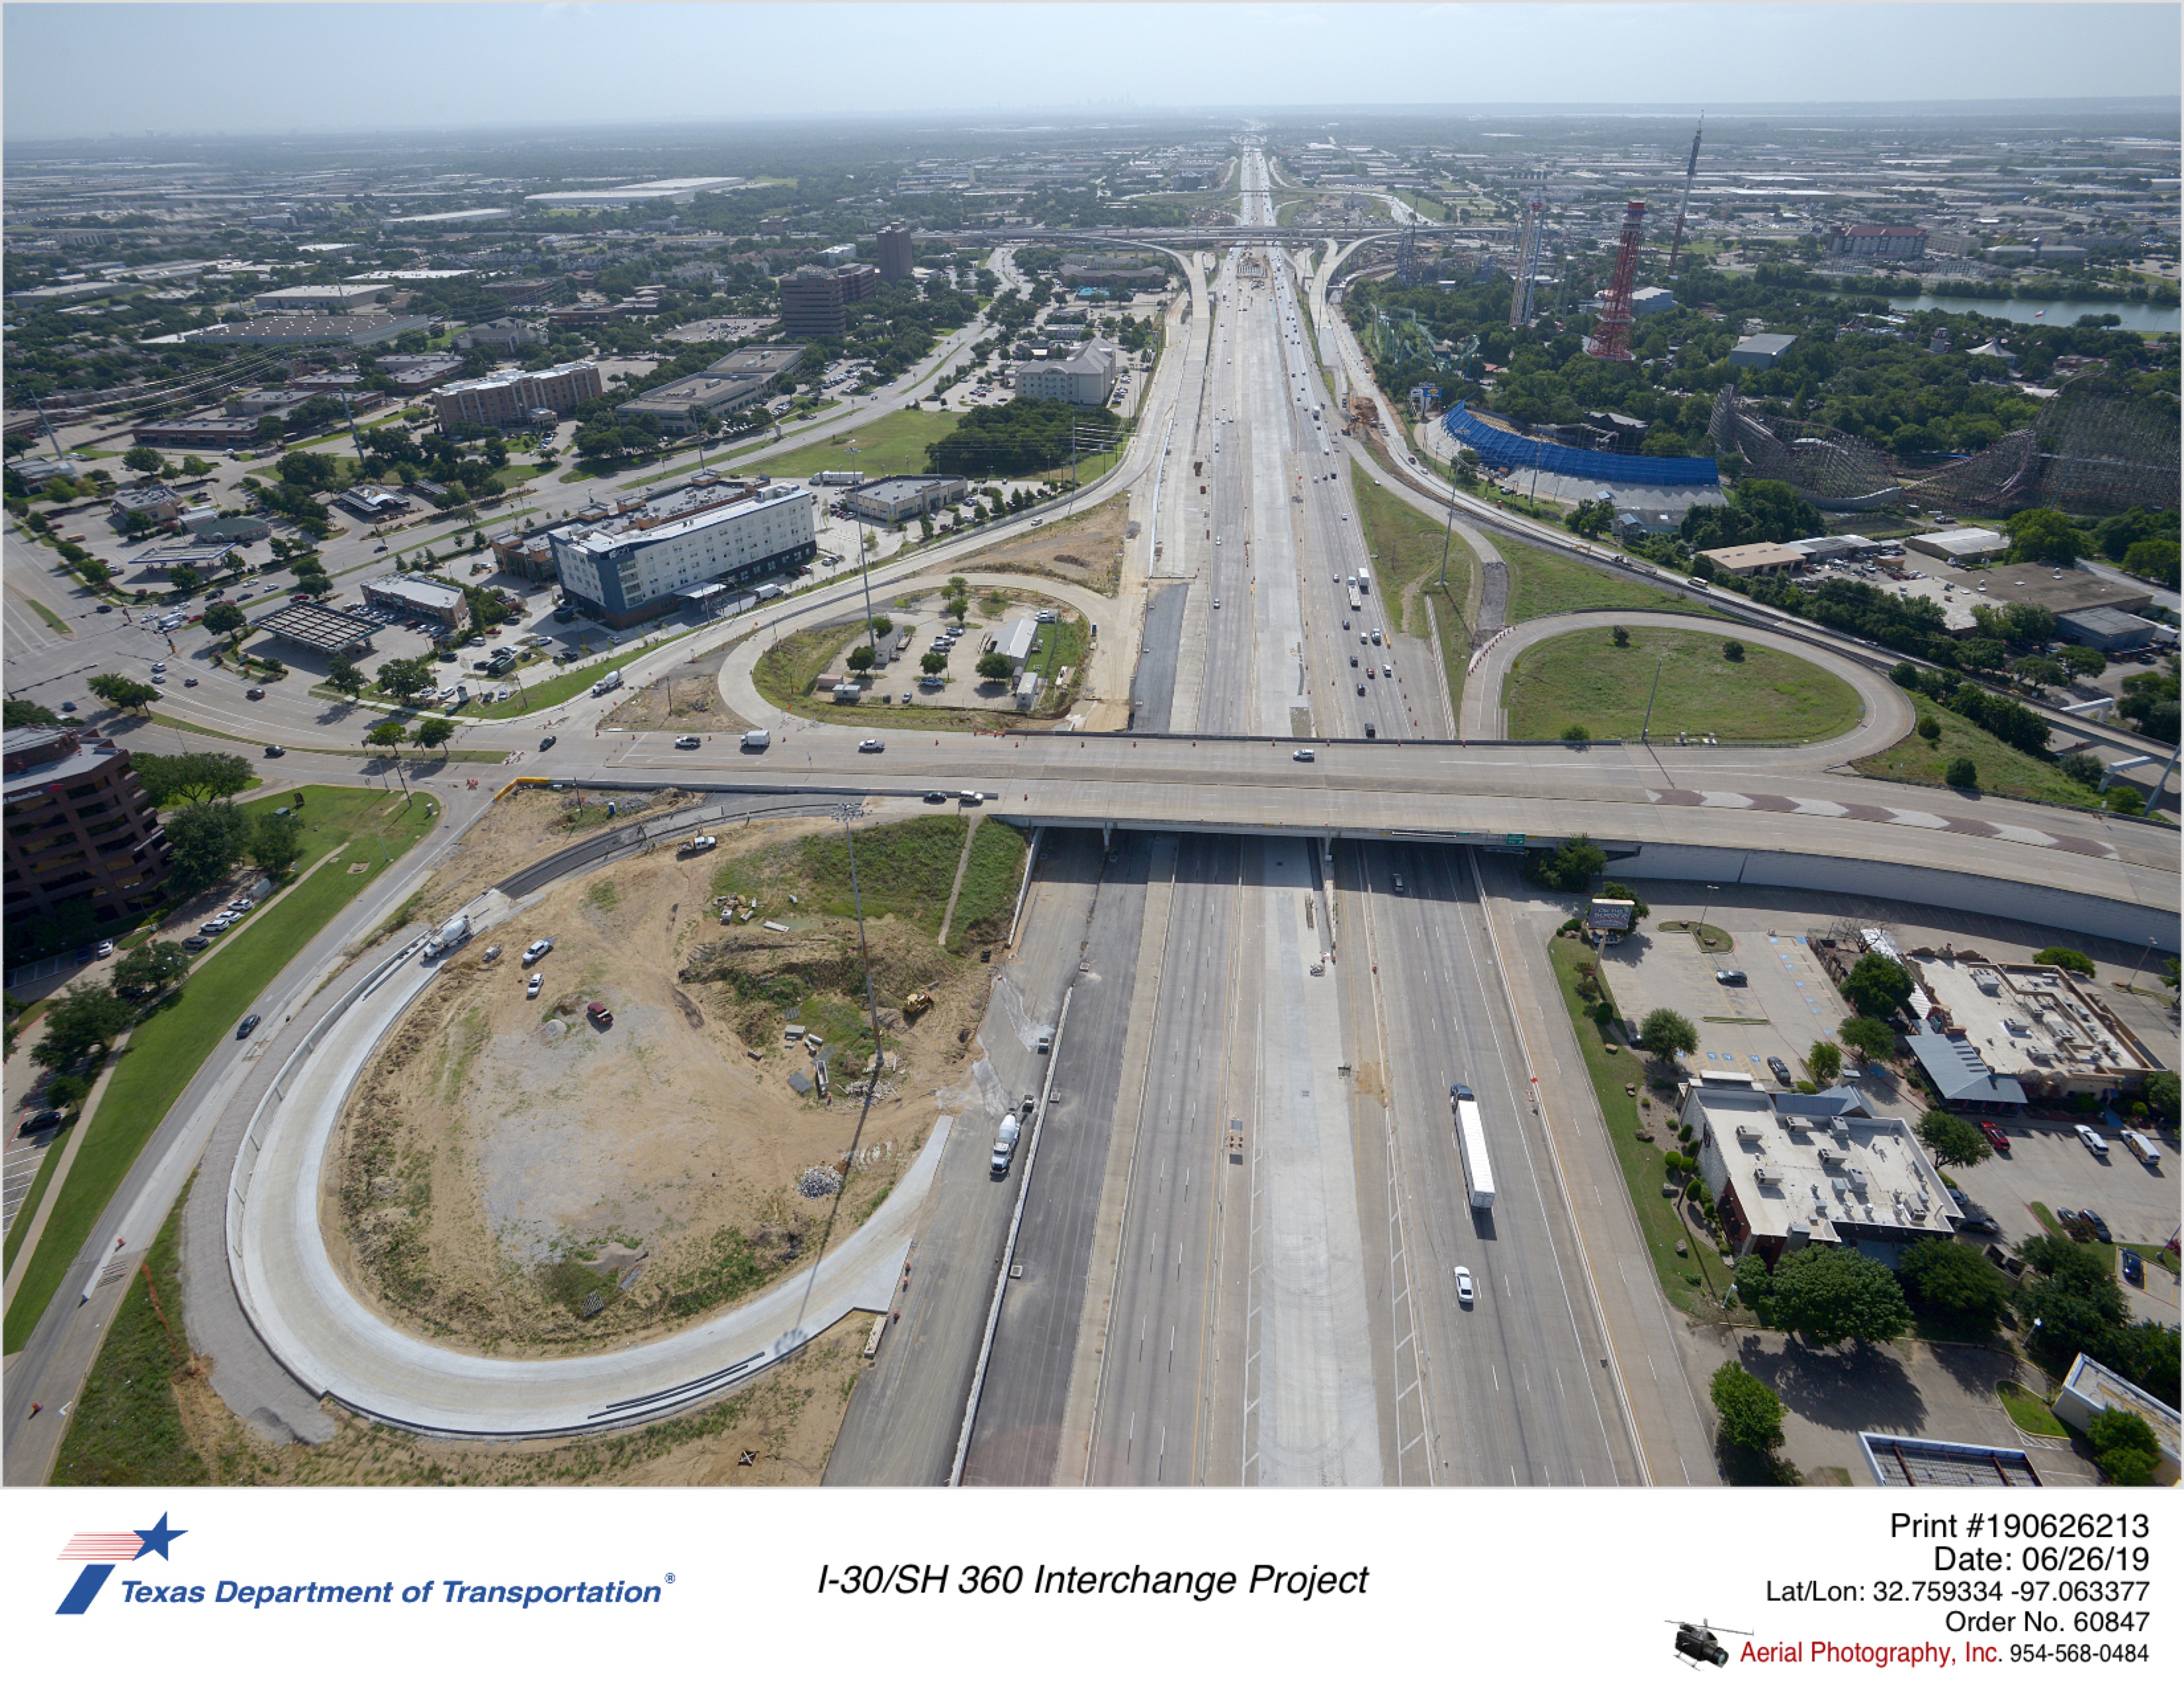 I-30/Ballpark Way interchange over I-30 looking east. Ballpark Way in foreground.